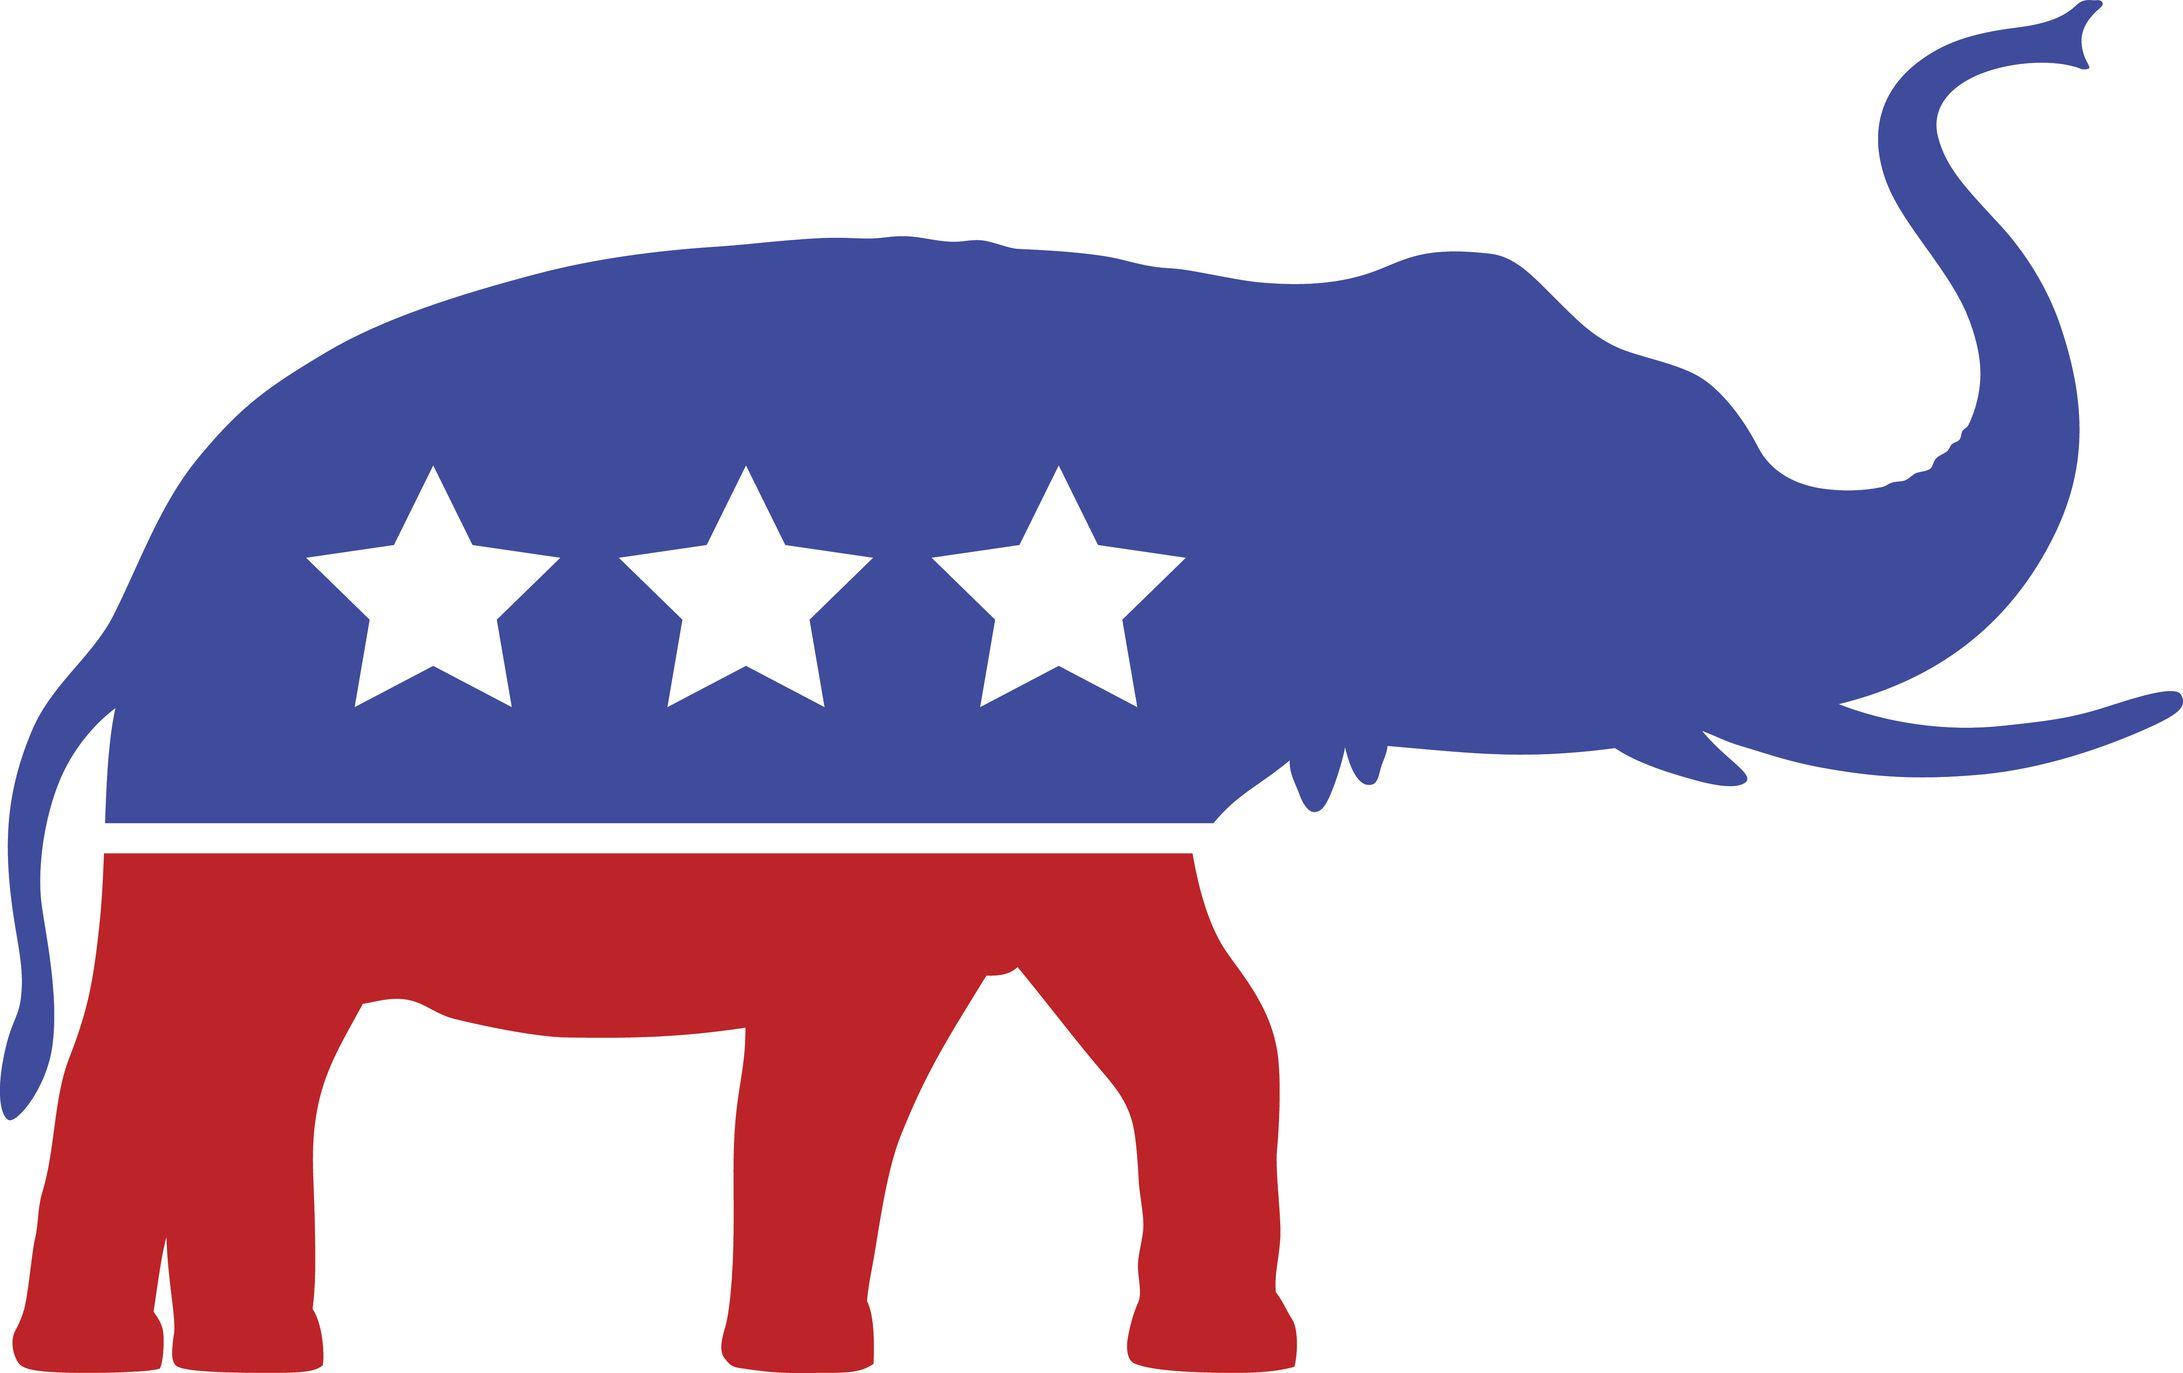 Why Does the Republican Party Use the GOP Acronym?